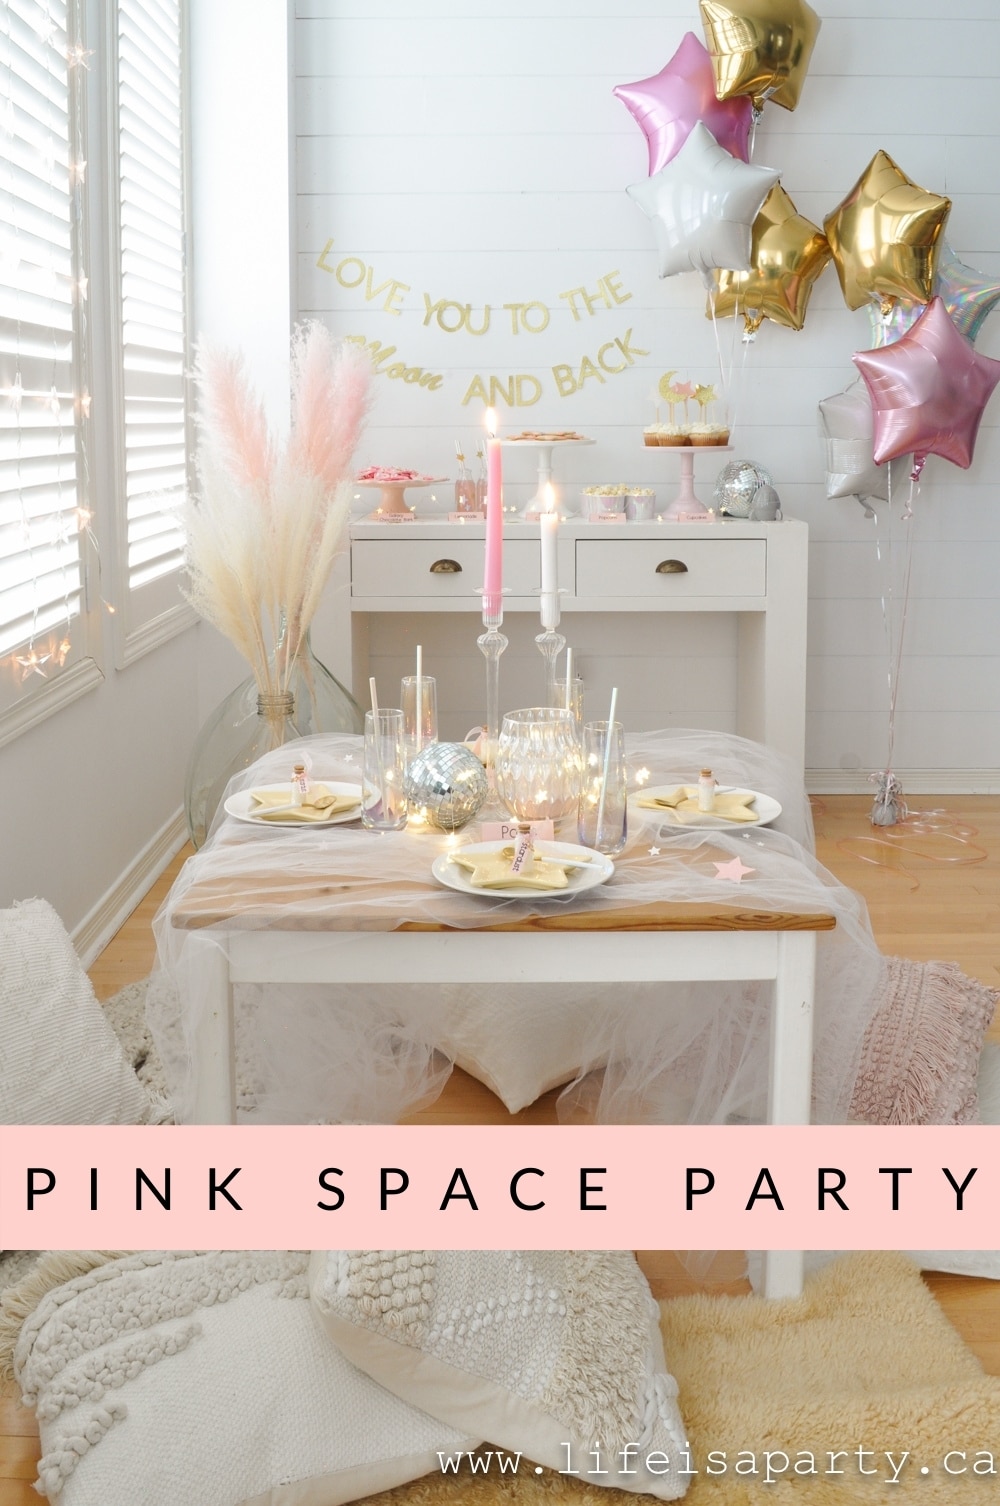 Pink Space Themed Party: "I love you to the moon and back" themed star and space party with pink, and iridescent celestial accents.